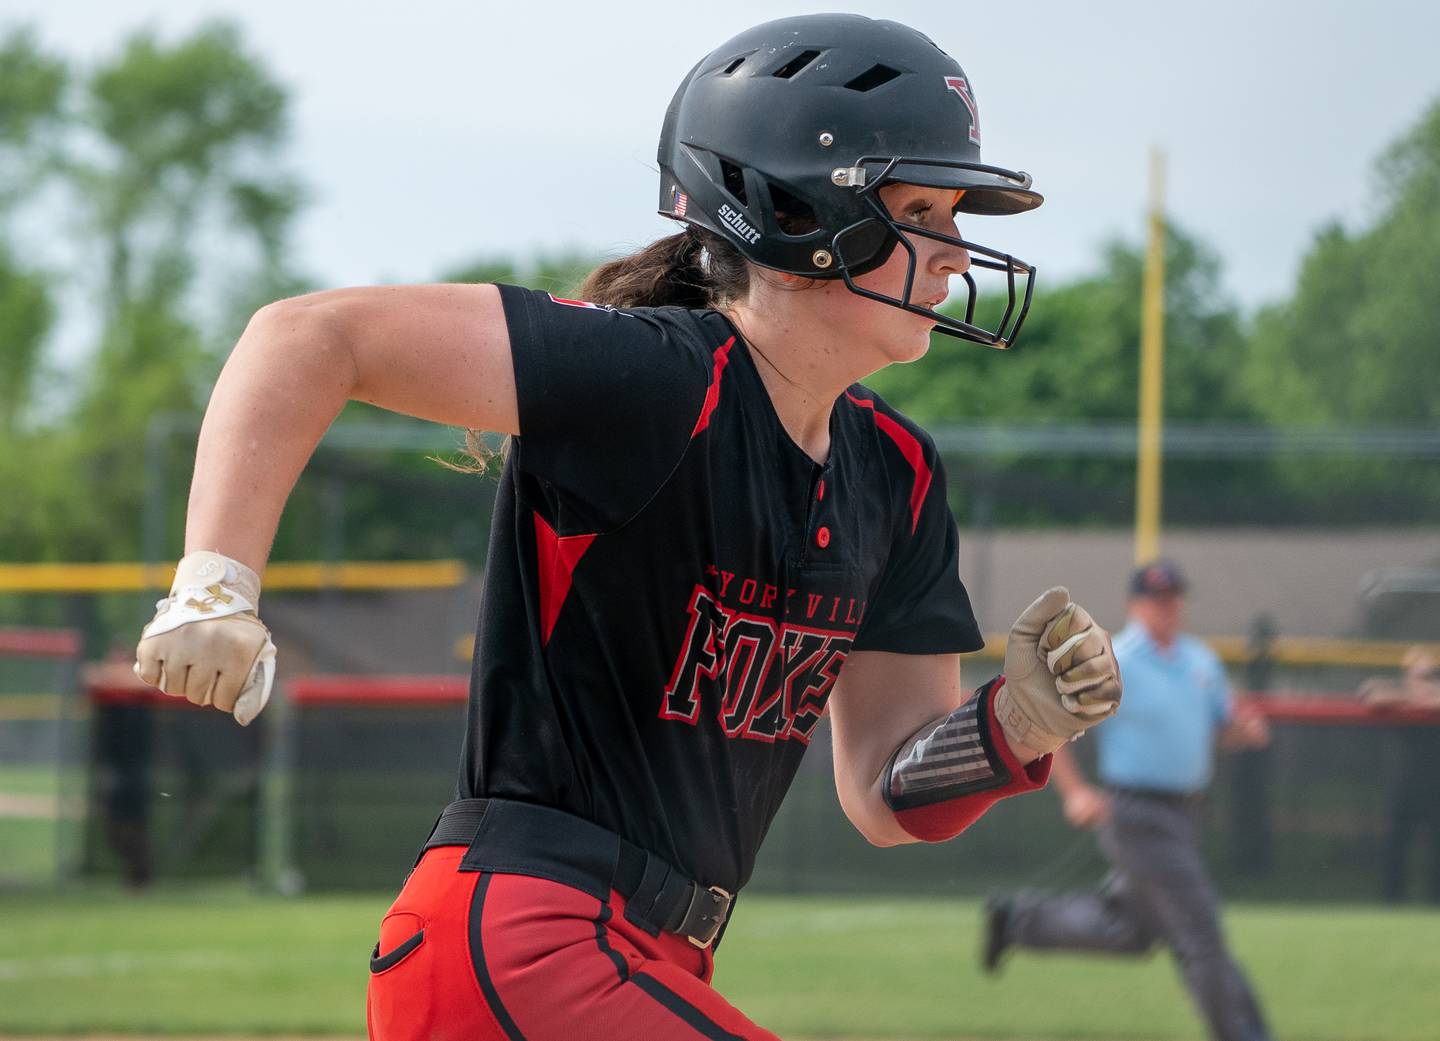 Yorkville's Samantha Davidowski (7) runs to first on a bunt attempt against West Aurora during the Class 4A Yorkville Sectional semifinal at Yorkville High School on Tuesday, May 31, 2022.